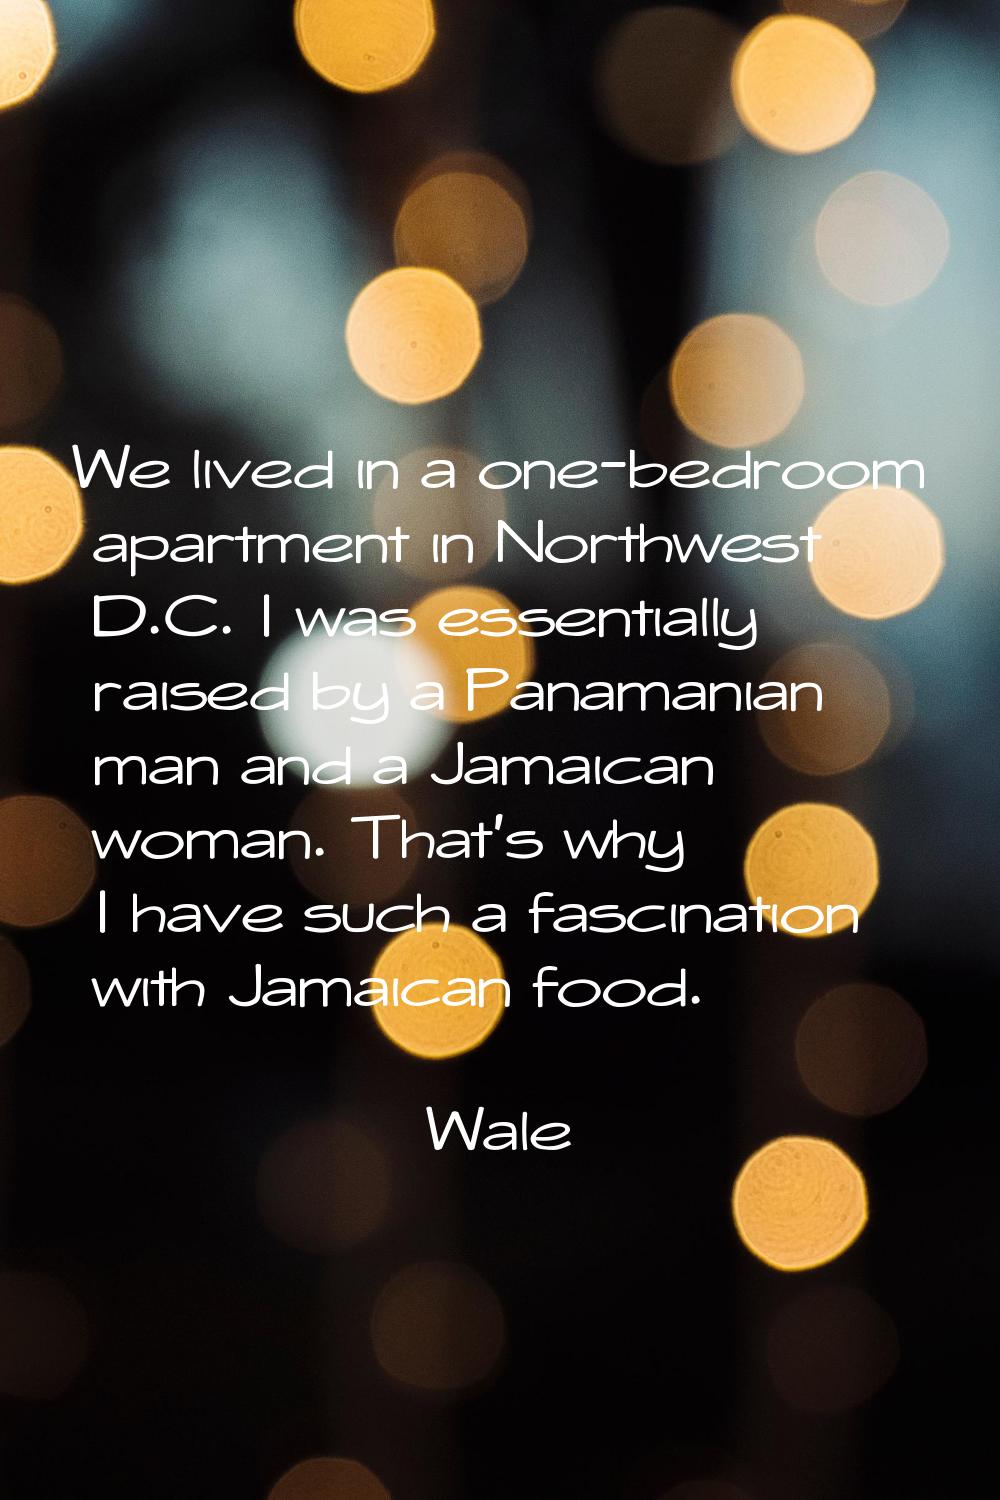 We lived in a one-bedroom apartment in Northwest D.C. I was essentially raised by a Panamanian man 